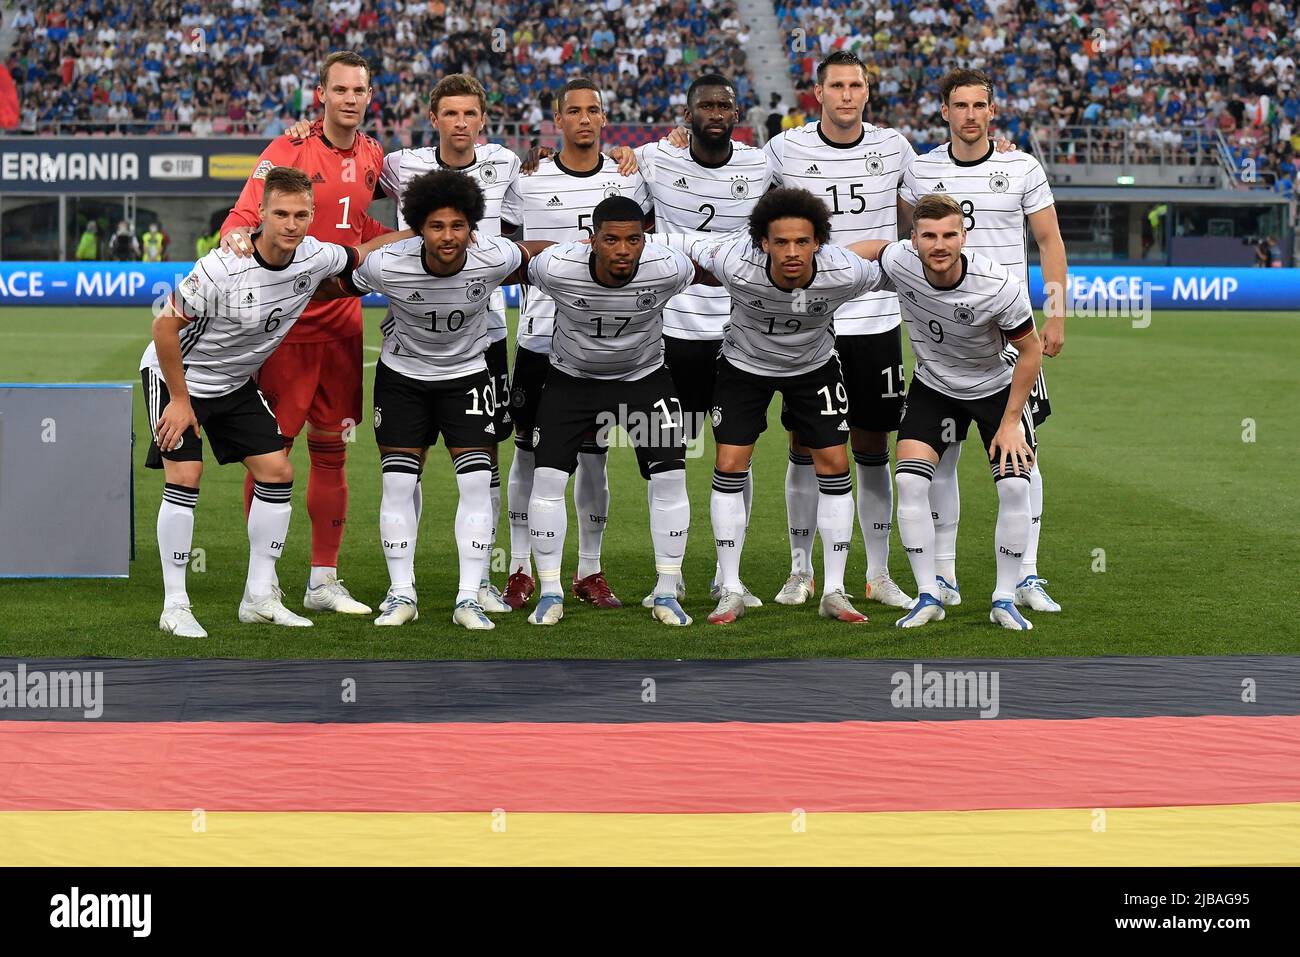 Bologna, Italy. 04th June, 2022. Players of Germany pose for a team photo during the Uefa Nations League group 3 football match between Italy and Germany at Renato Dall'Ara stadium in Bologna (Italy), June 4th, 2022. Photo Andrea Staccioli/Insidefoto Credit: insidefoto srl/Alamy Live News Stock Photo